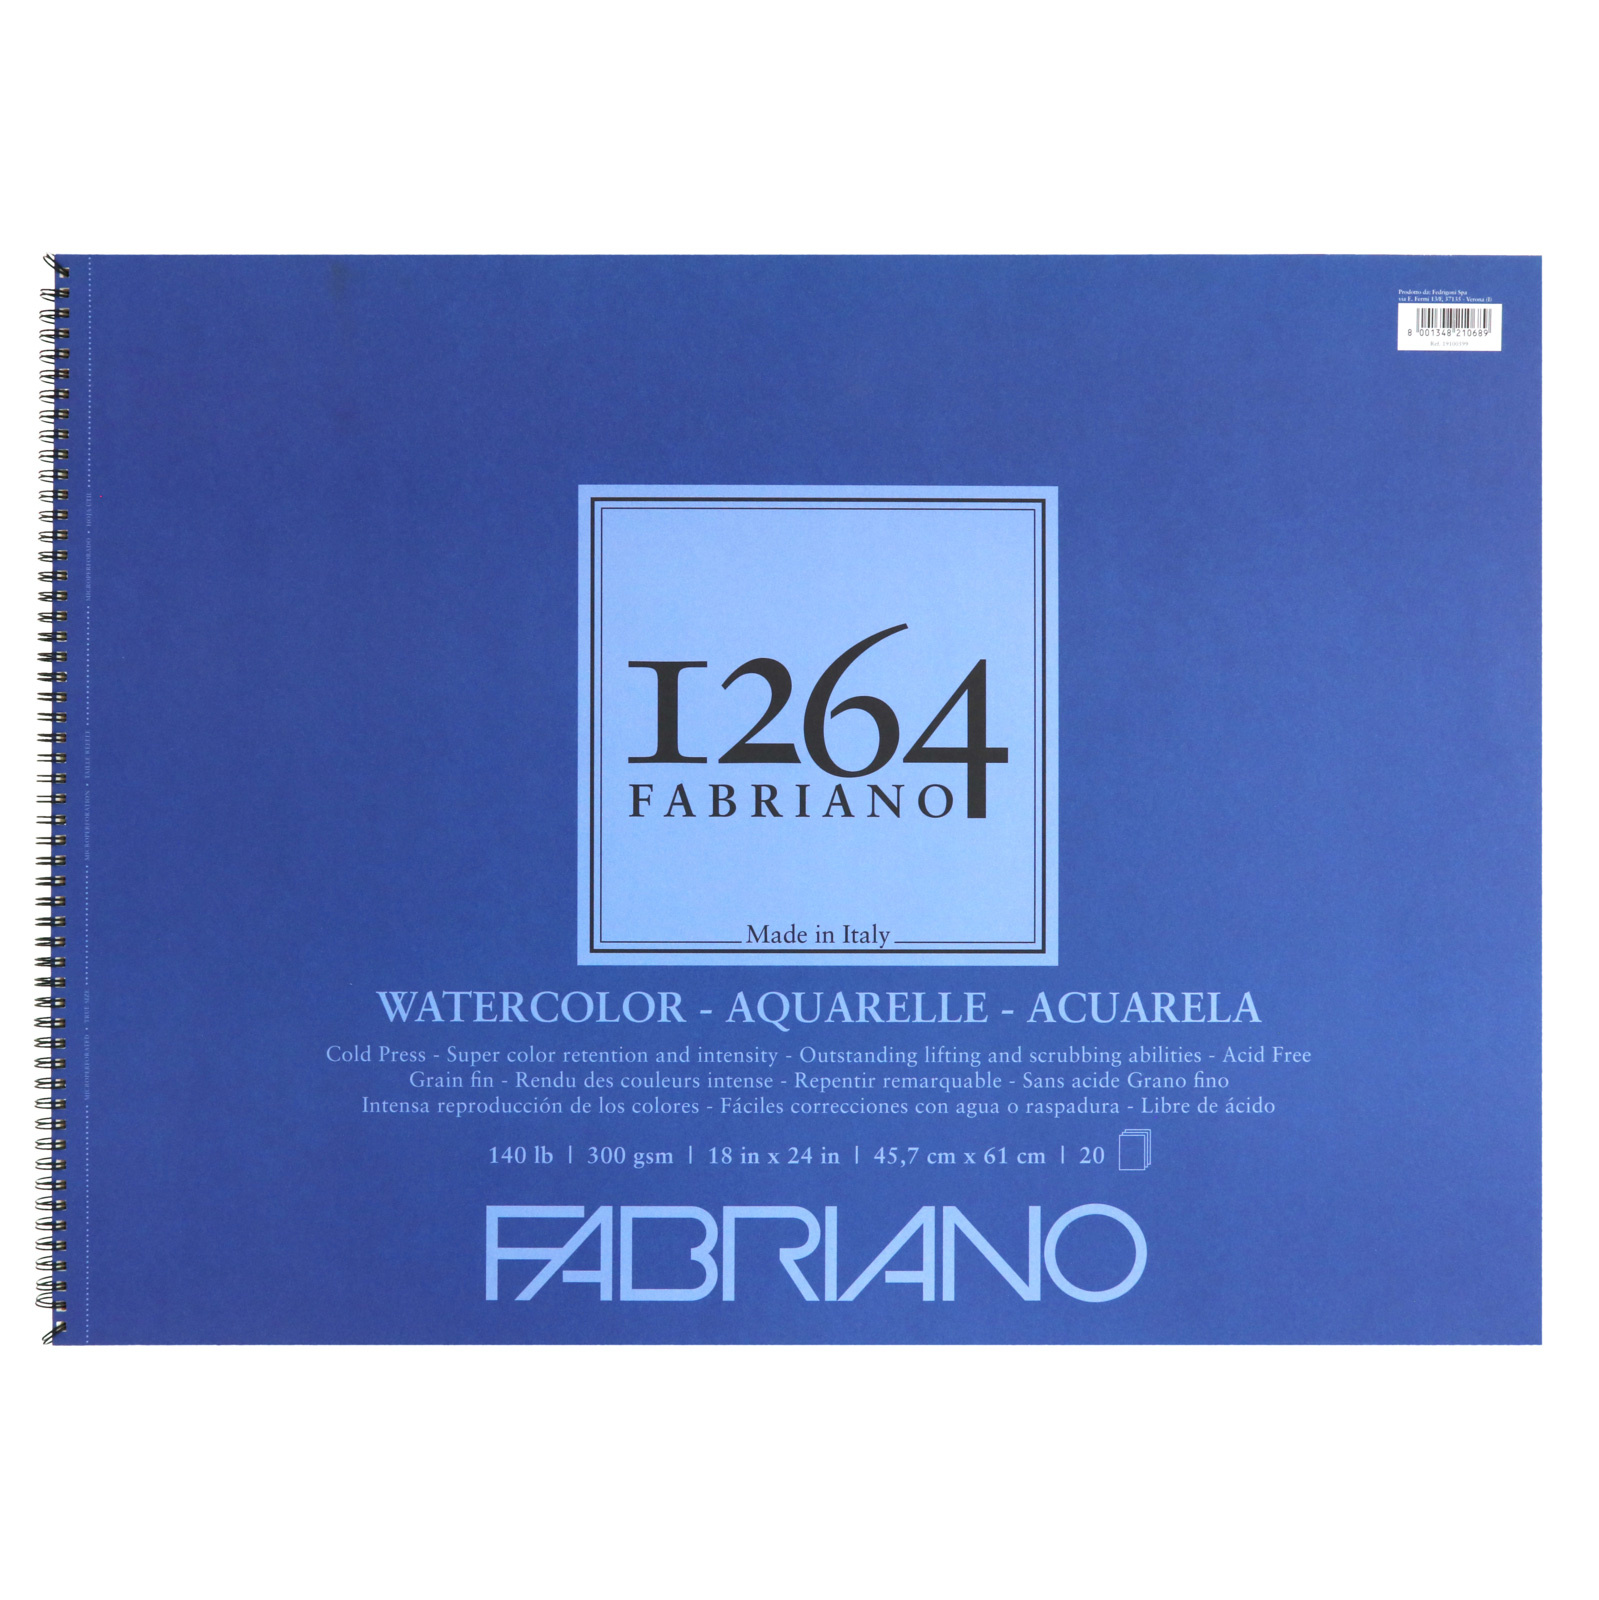 Fabriano 1264 Watercolor Pads, Spiral-Bound, 18" x 24"